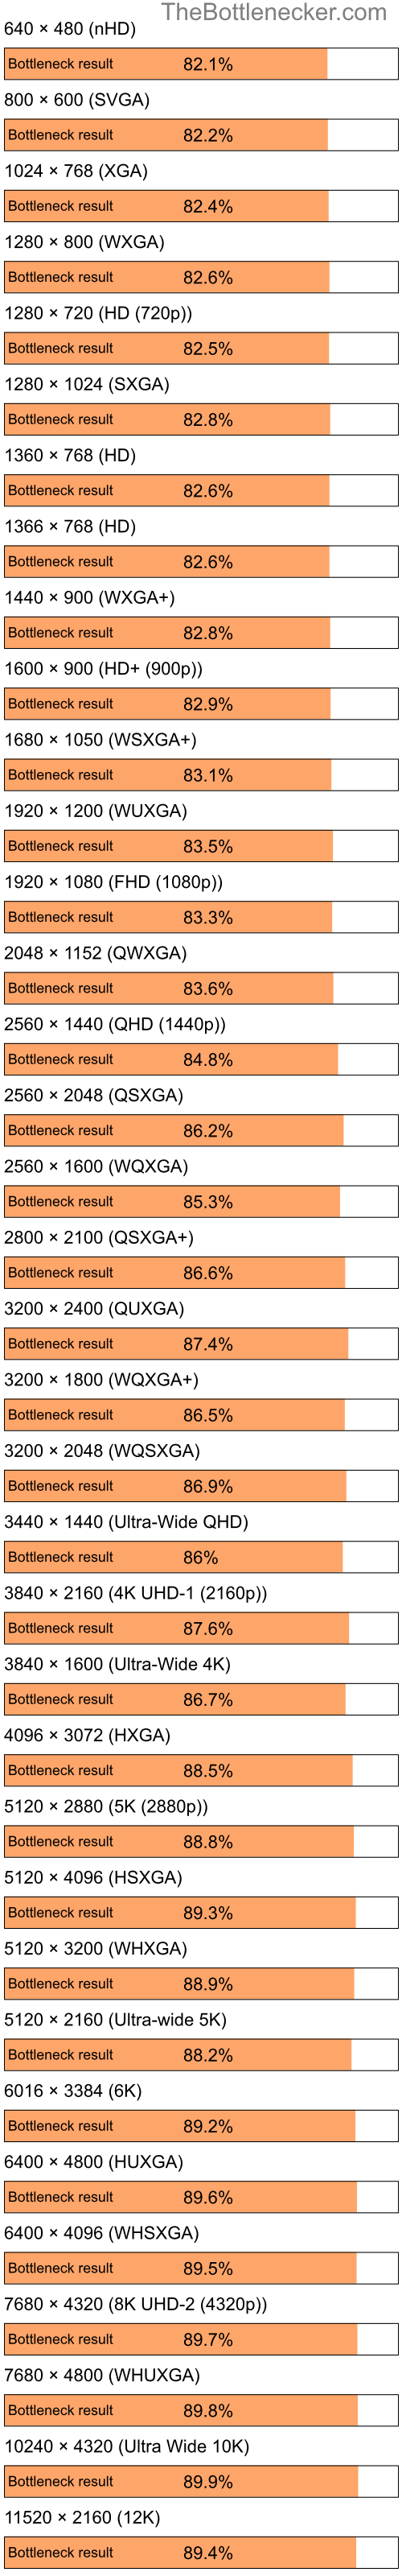 Bottleneck results by resolution for Intel Pentium 4 and NVIDIA nForce 630a in Graphic Card Intense Tasks